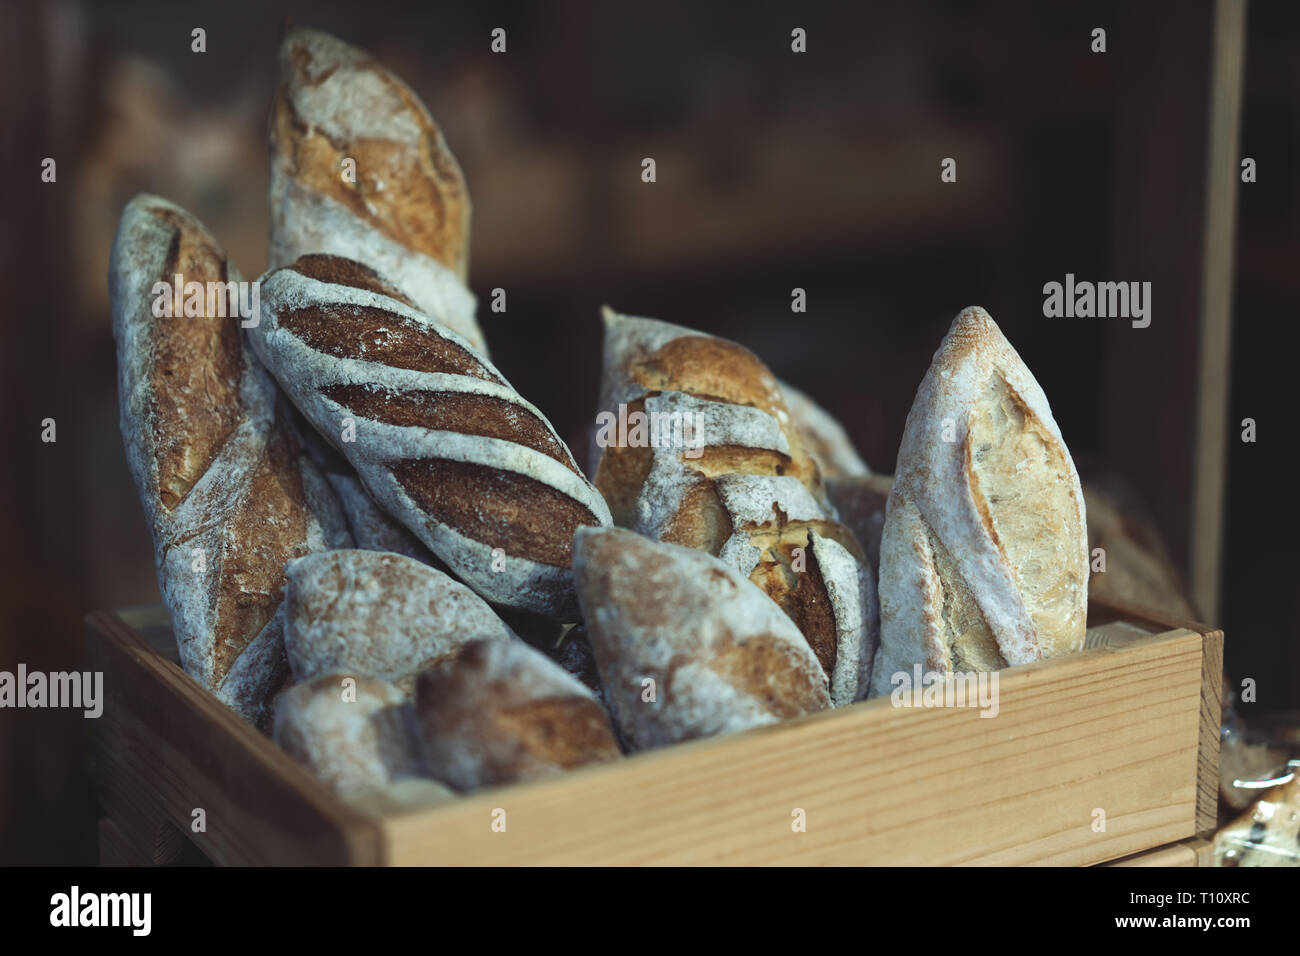 Flour Product Loaf of Bread Baked Goods on the Branches of the